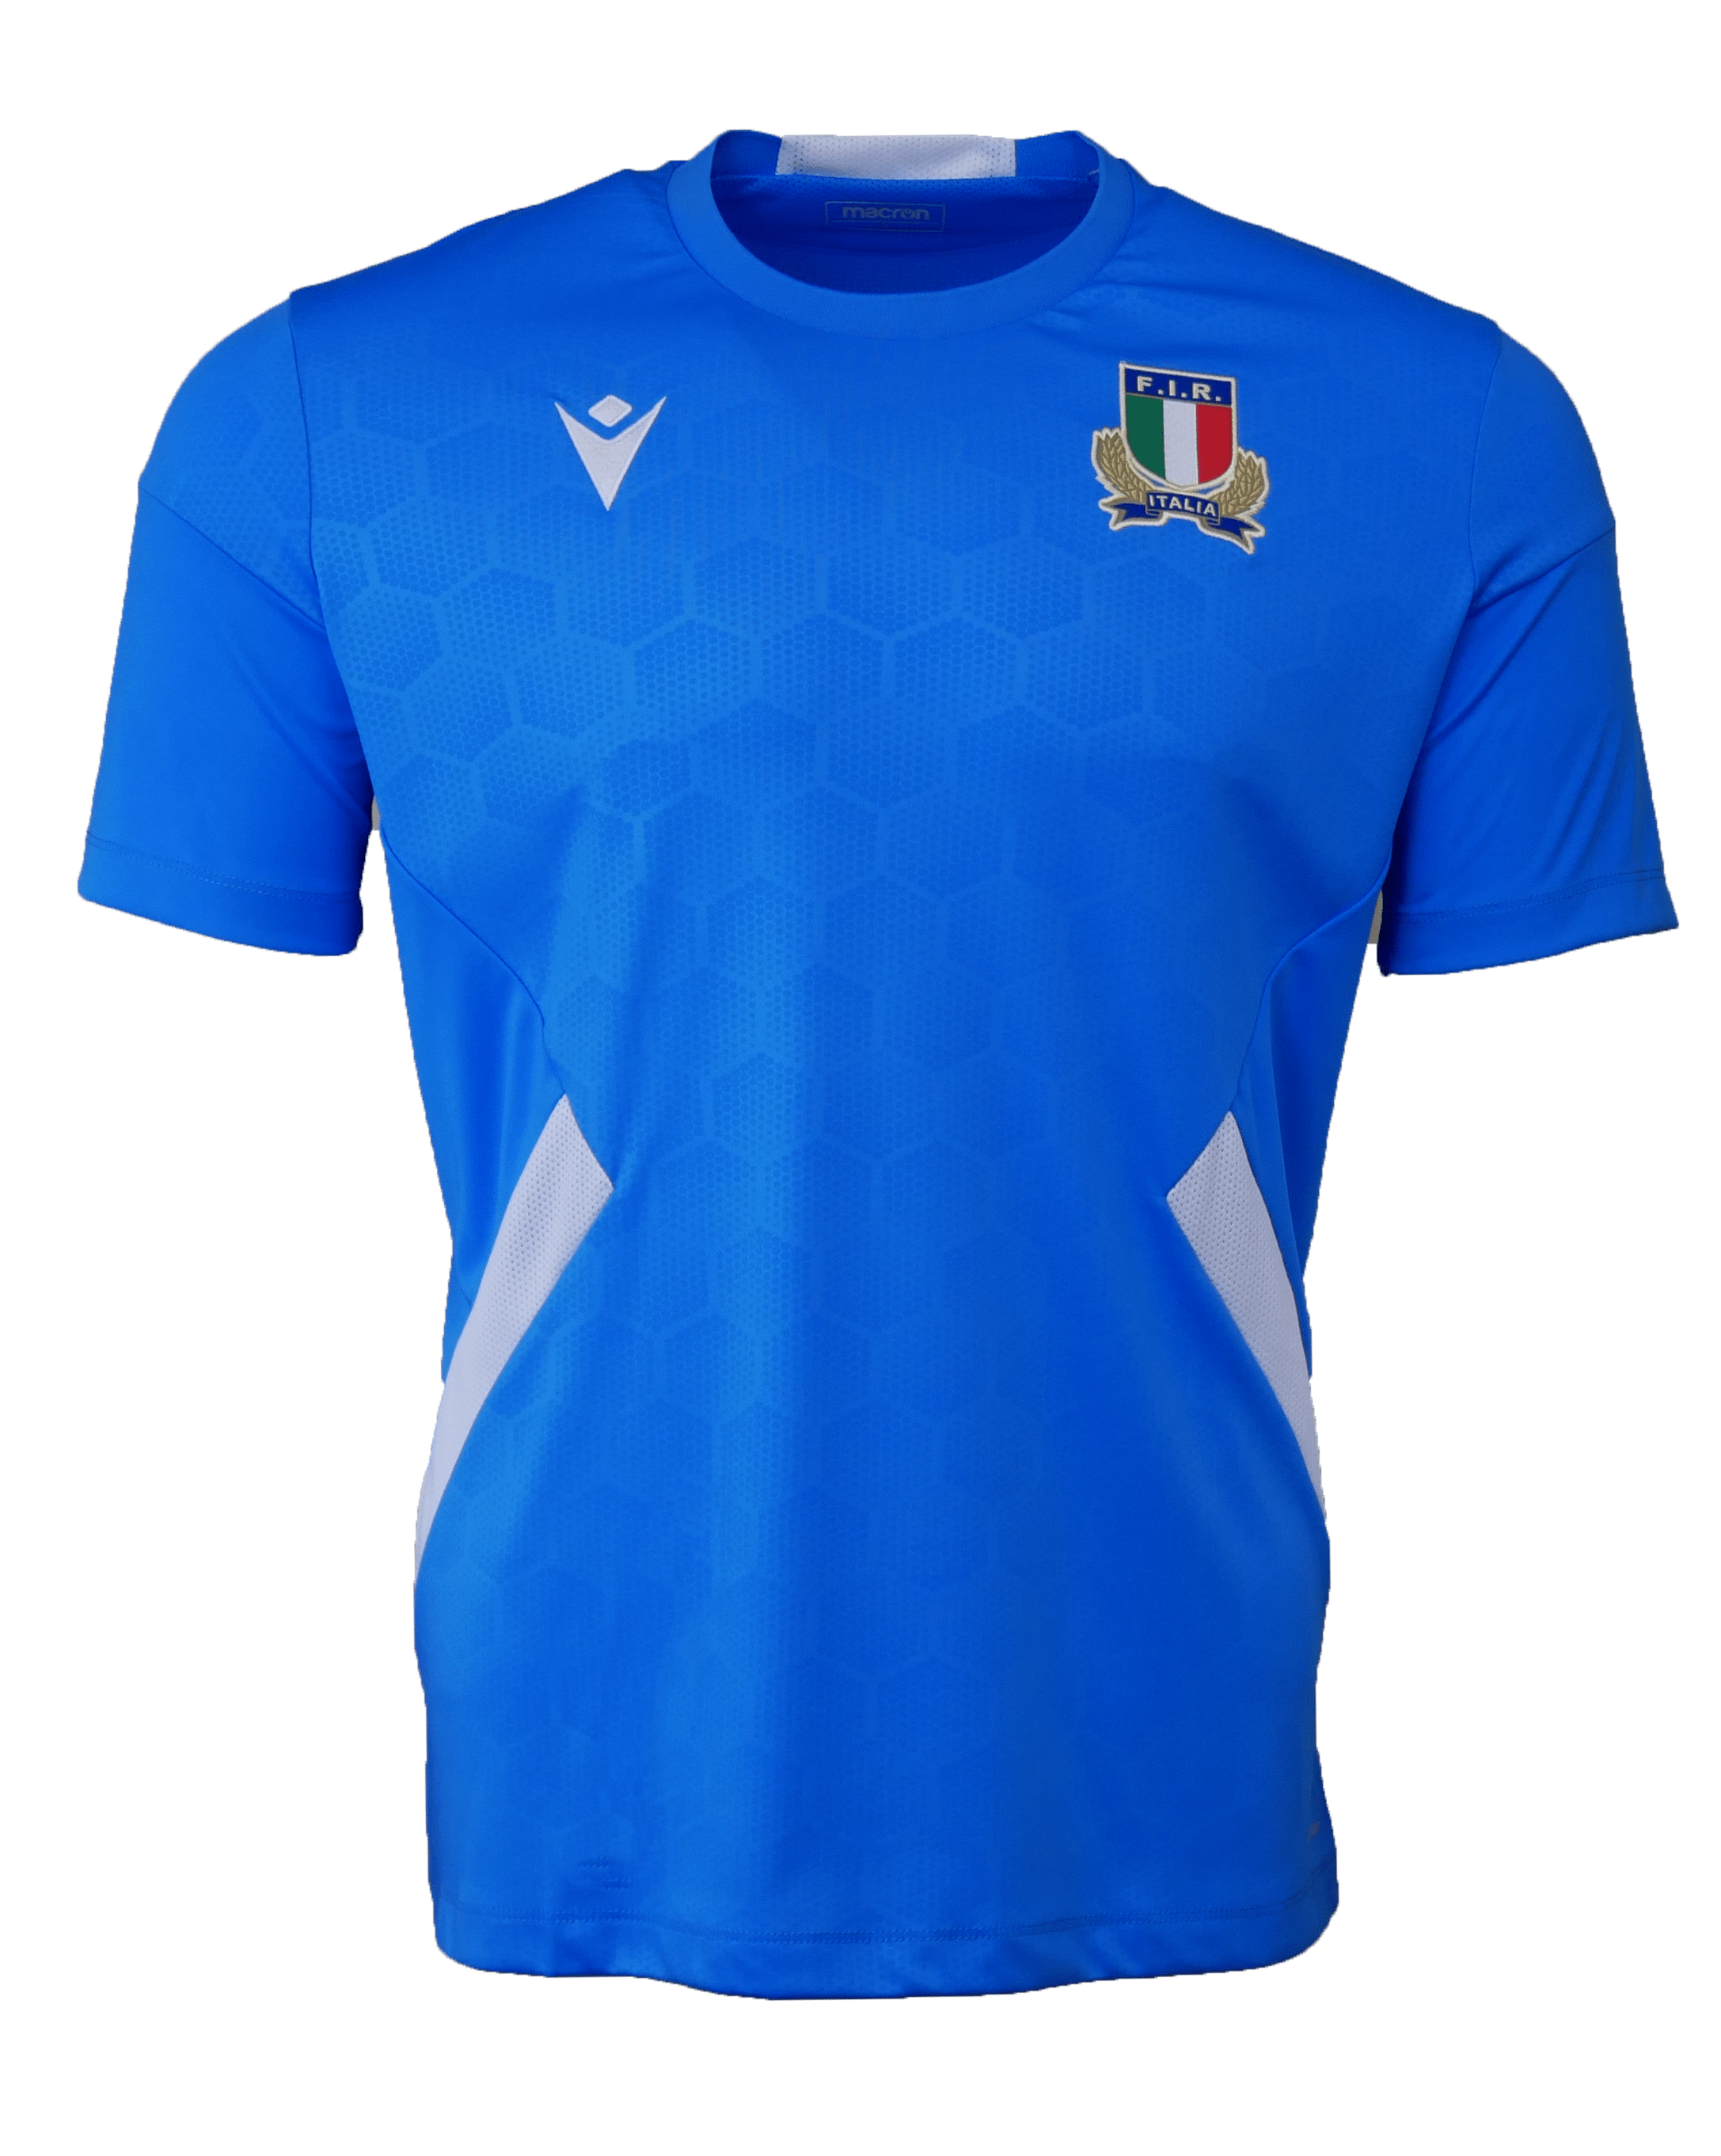 Italy FIR Rugby Training Shirt 22/23 by Macron - Blue - World Rugby Shop